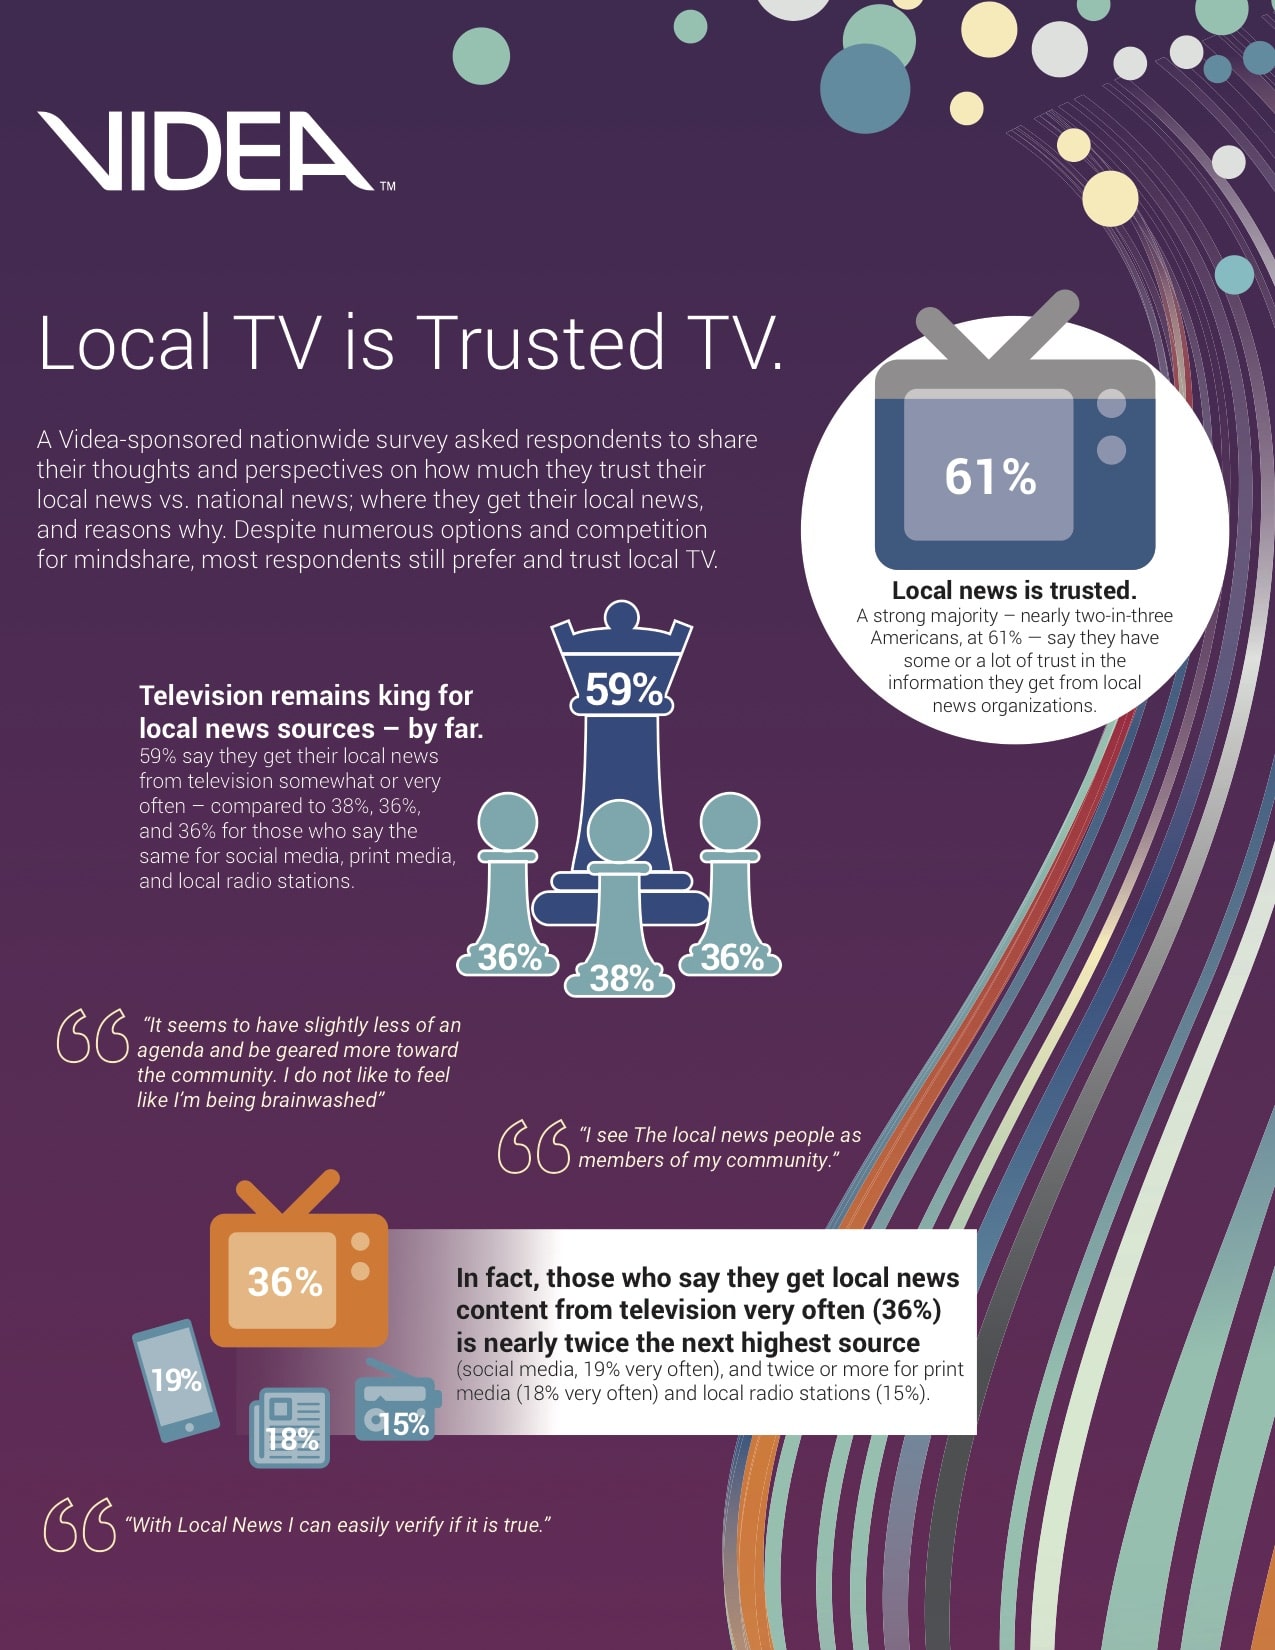 Video Americans trust local news more than national media